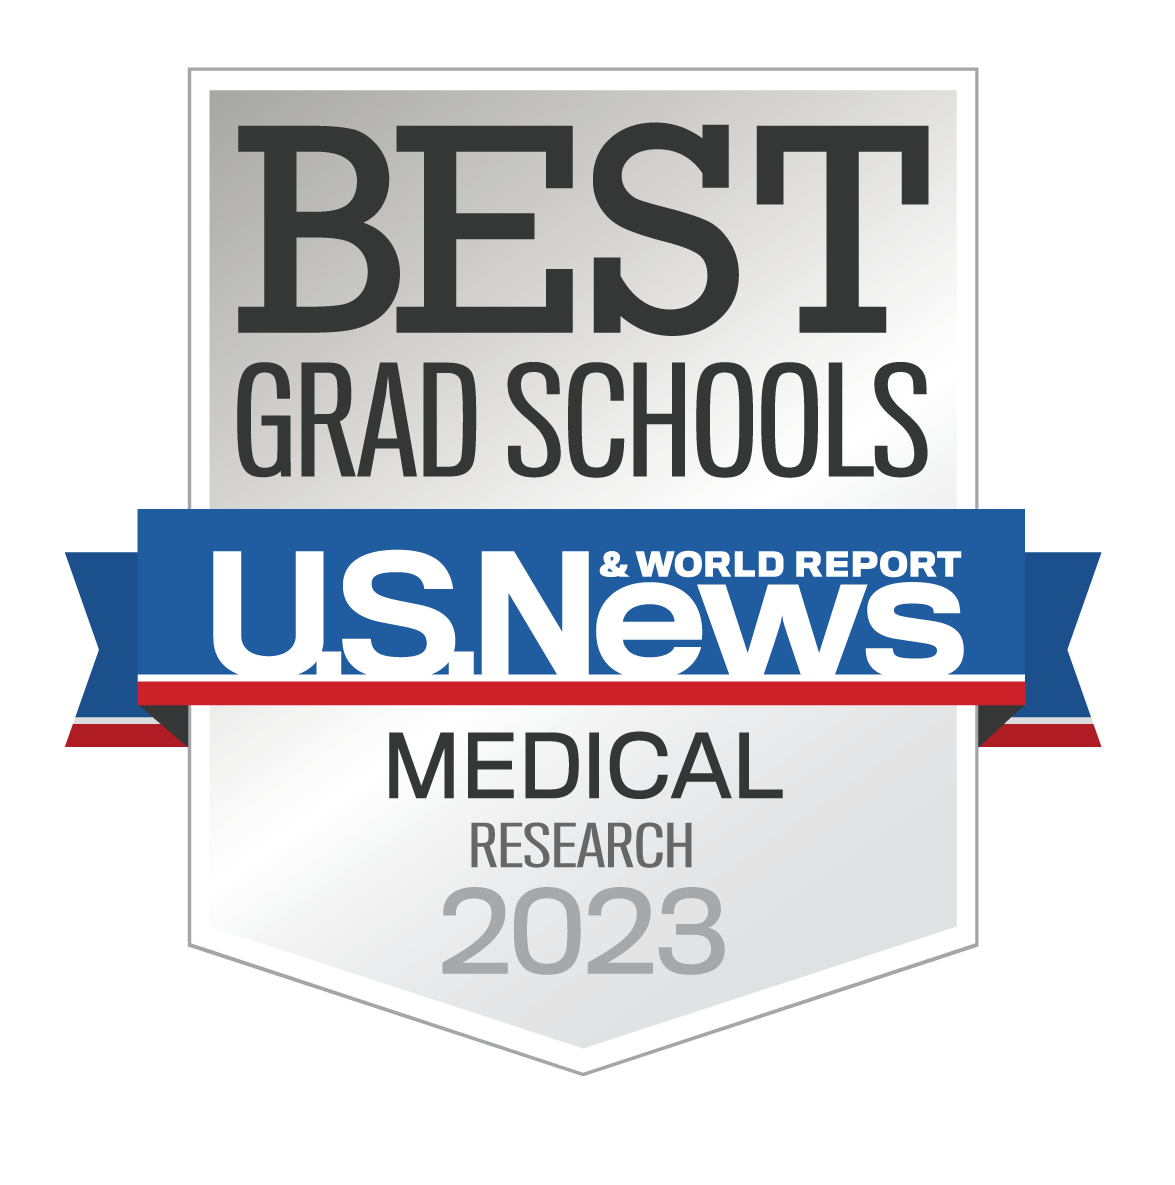 Best Grad Schools | Medical Research 2023 | US News and World Report